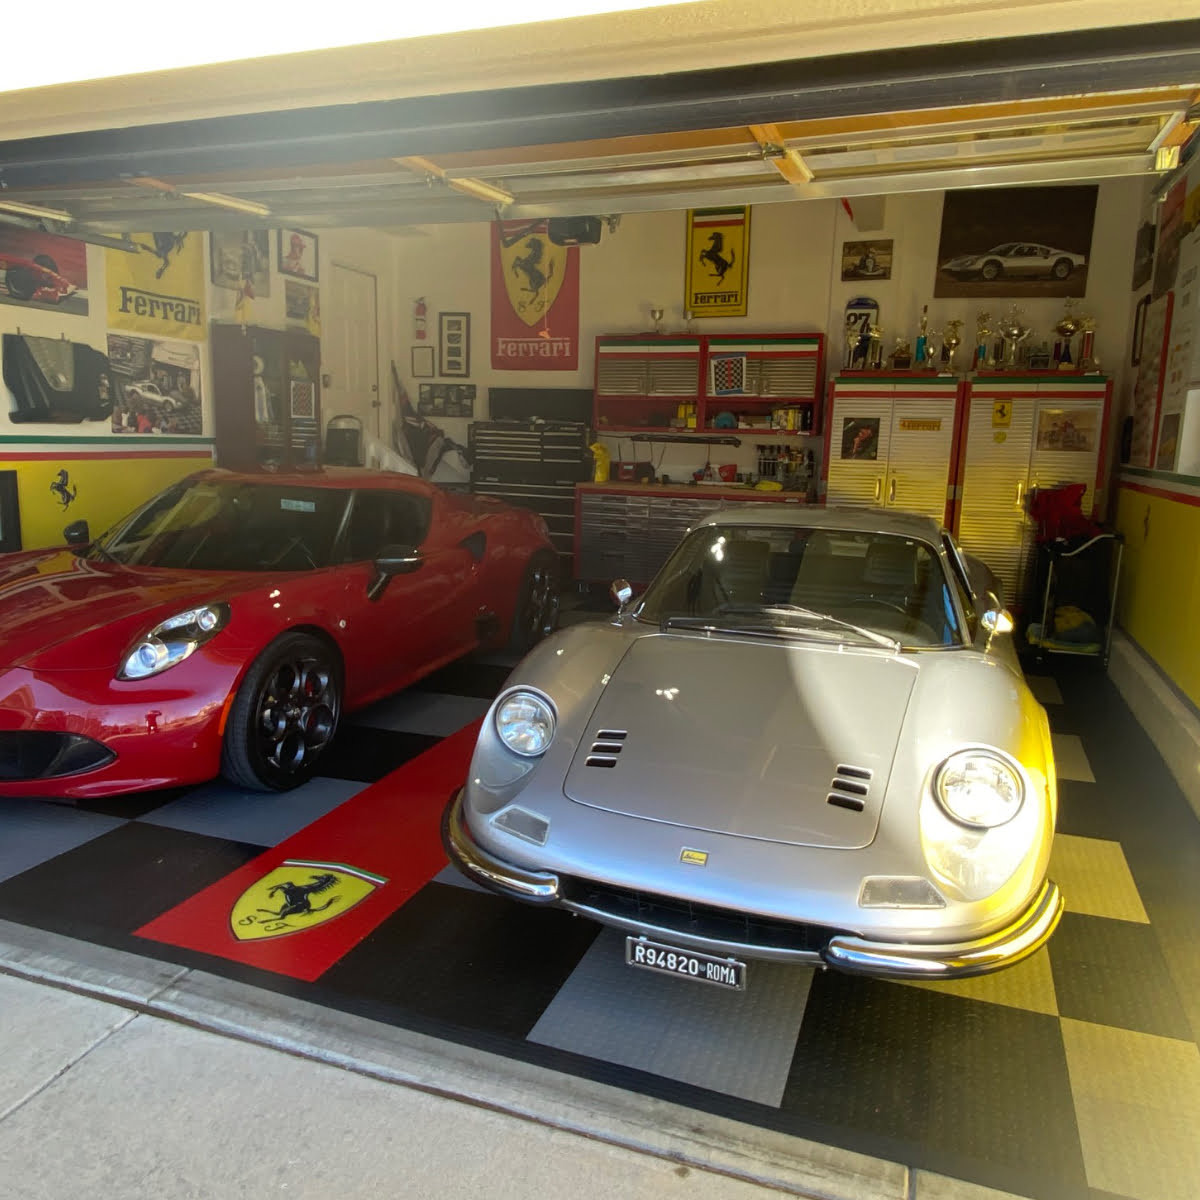 Ferrari cars sitting on our Coin top black, gray and red tiles.